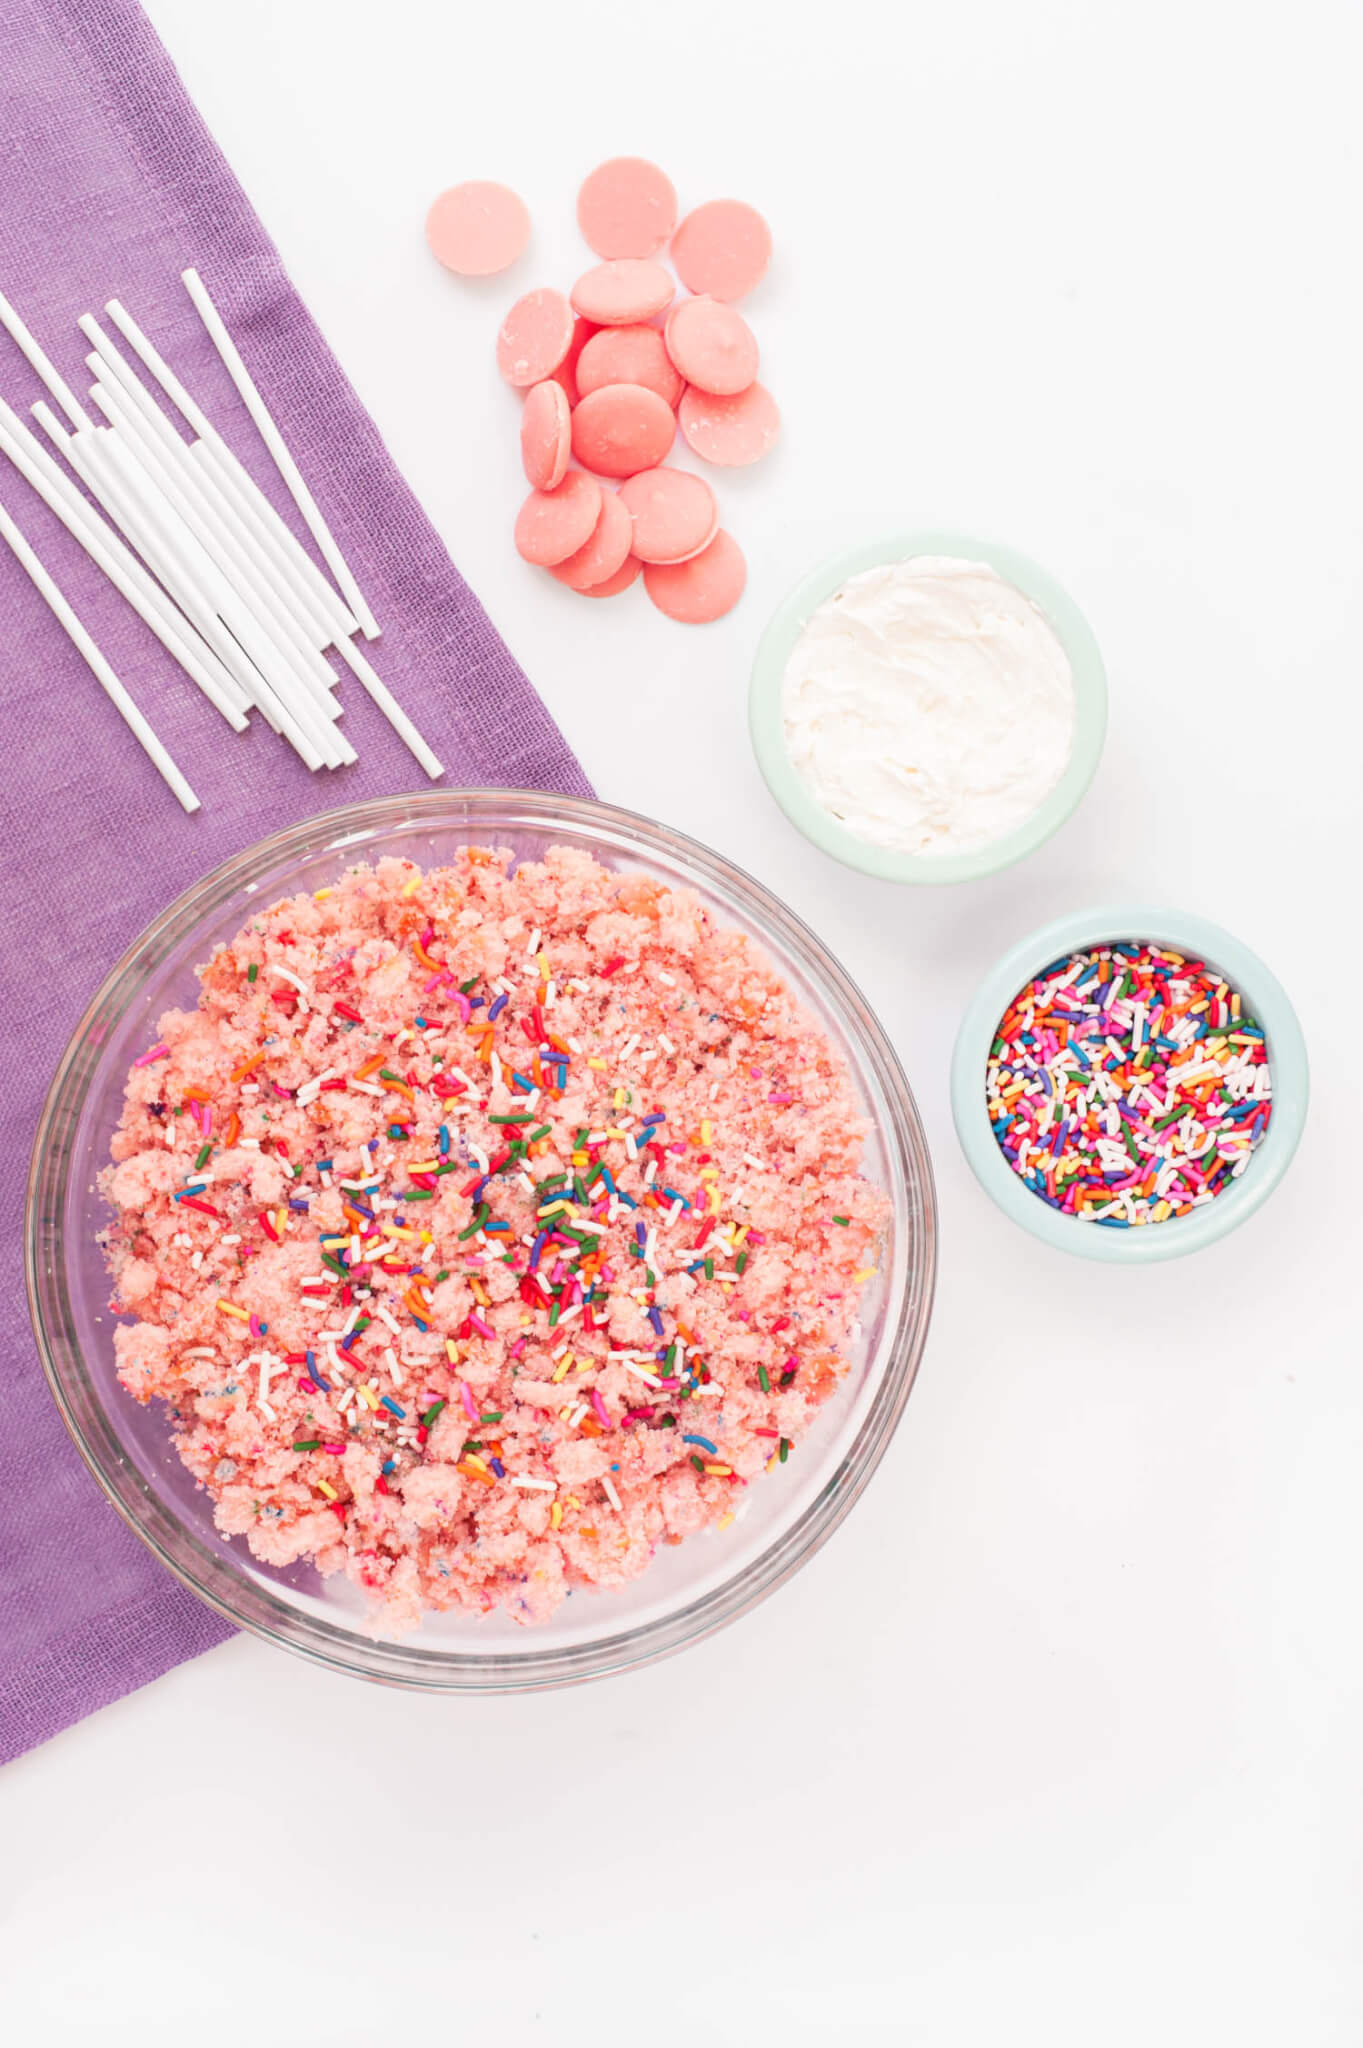 Strawberry Cake Pop Cake crumbles in a glass bowl with cake pop sticks, melting chocolate and sprinkles.